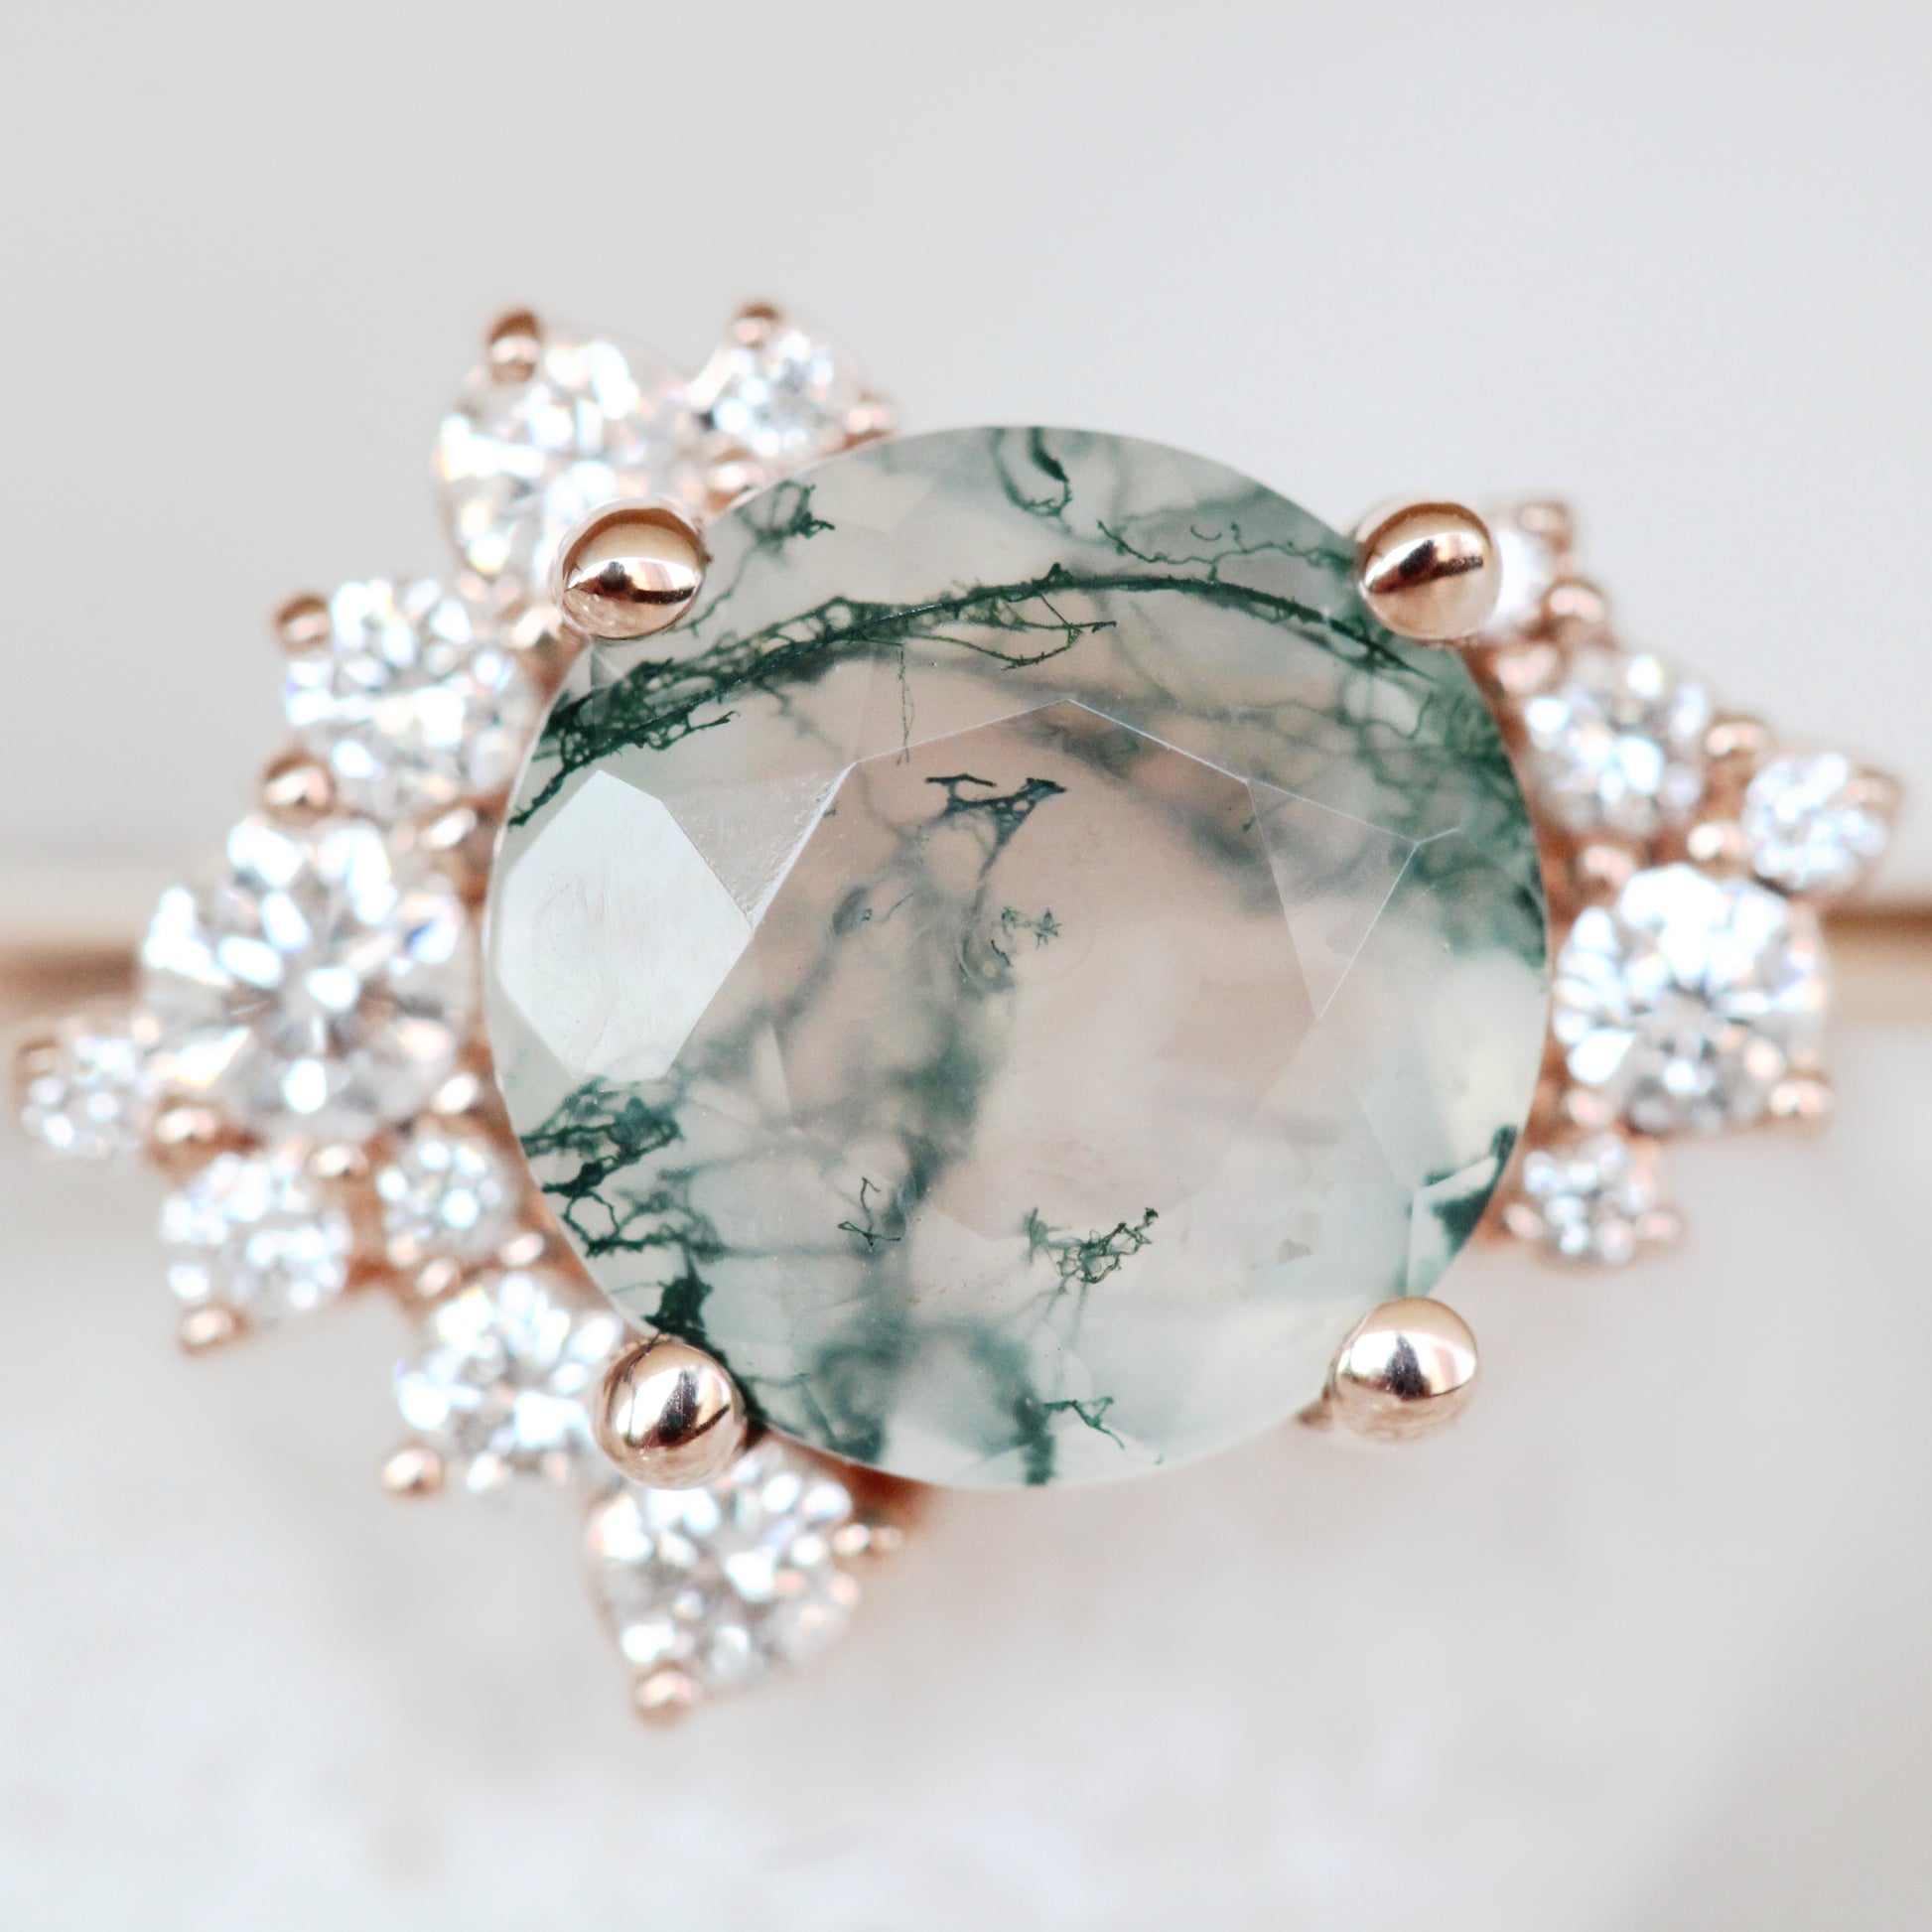 Orion Ring with a 1.80 Carat Round Moss Agate and White Accent Diamonds in your Choice of 14K Gold - Made to Order - Each Stone is Unique - Midwinter Co. Alternative Bridal Rings and Modern Fine Jewelry